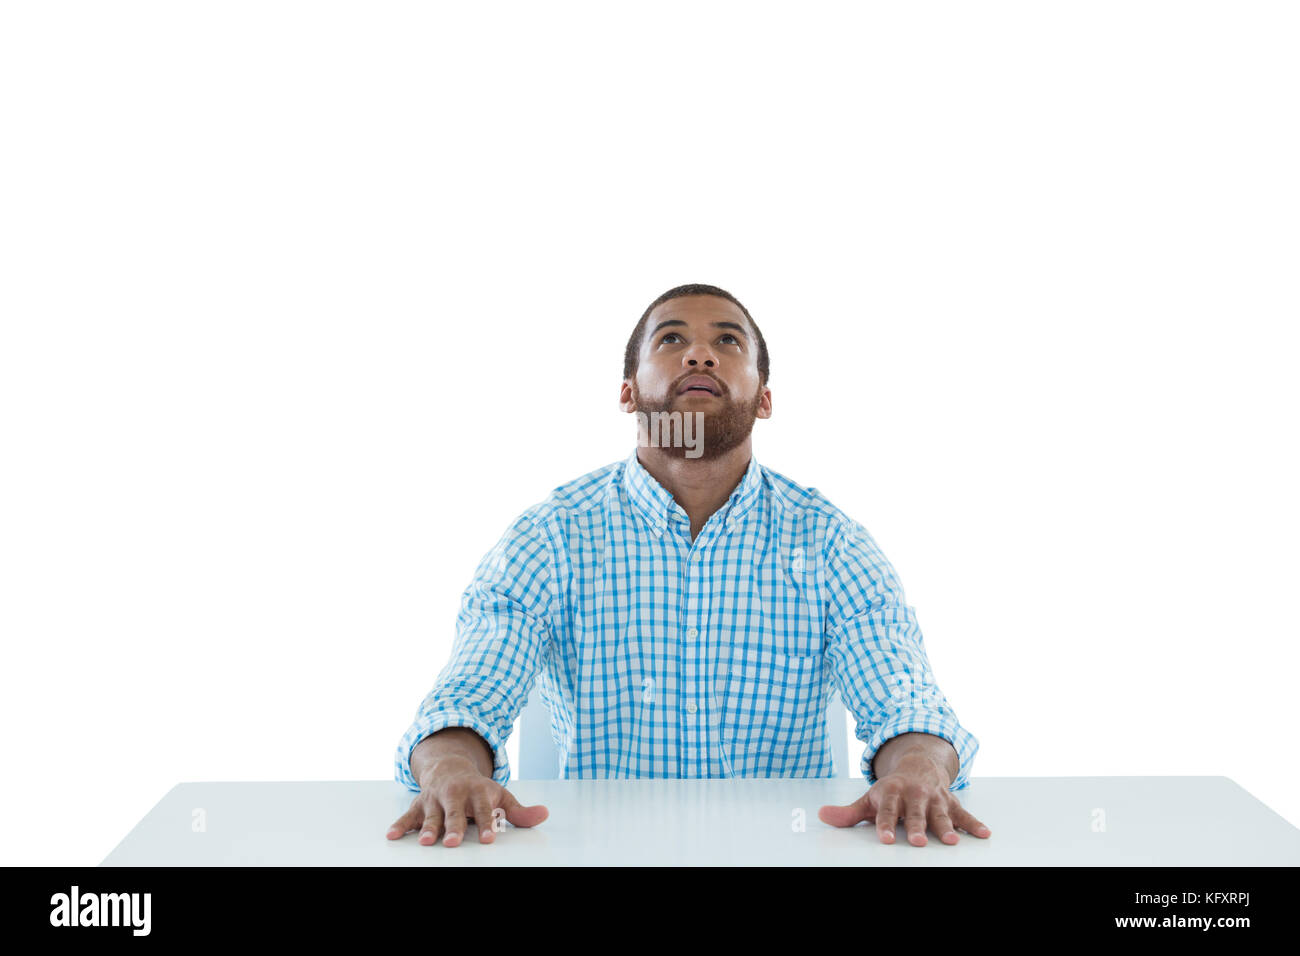 Male executive sitting at desk against white background Stock Photo